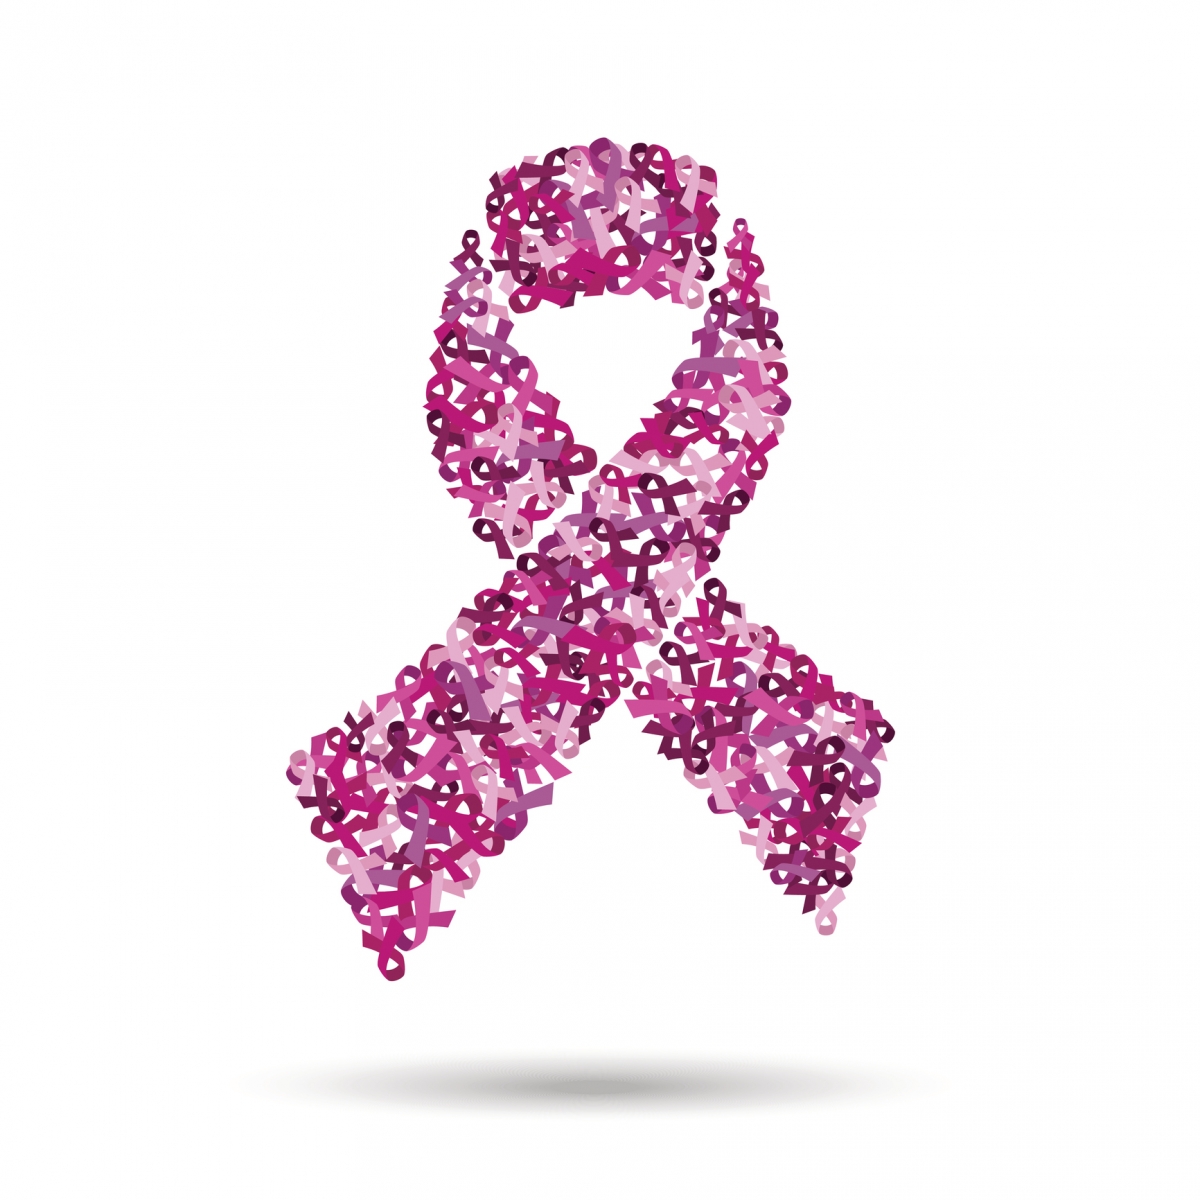 Treatment for Breast Cancer